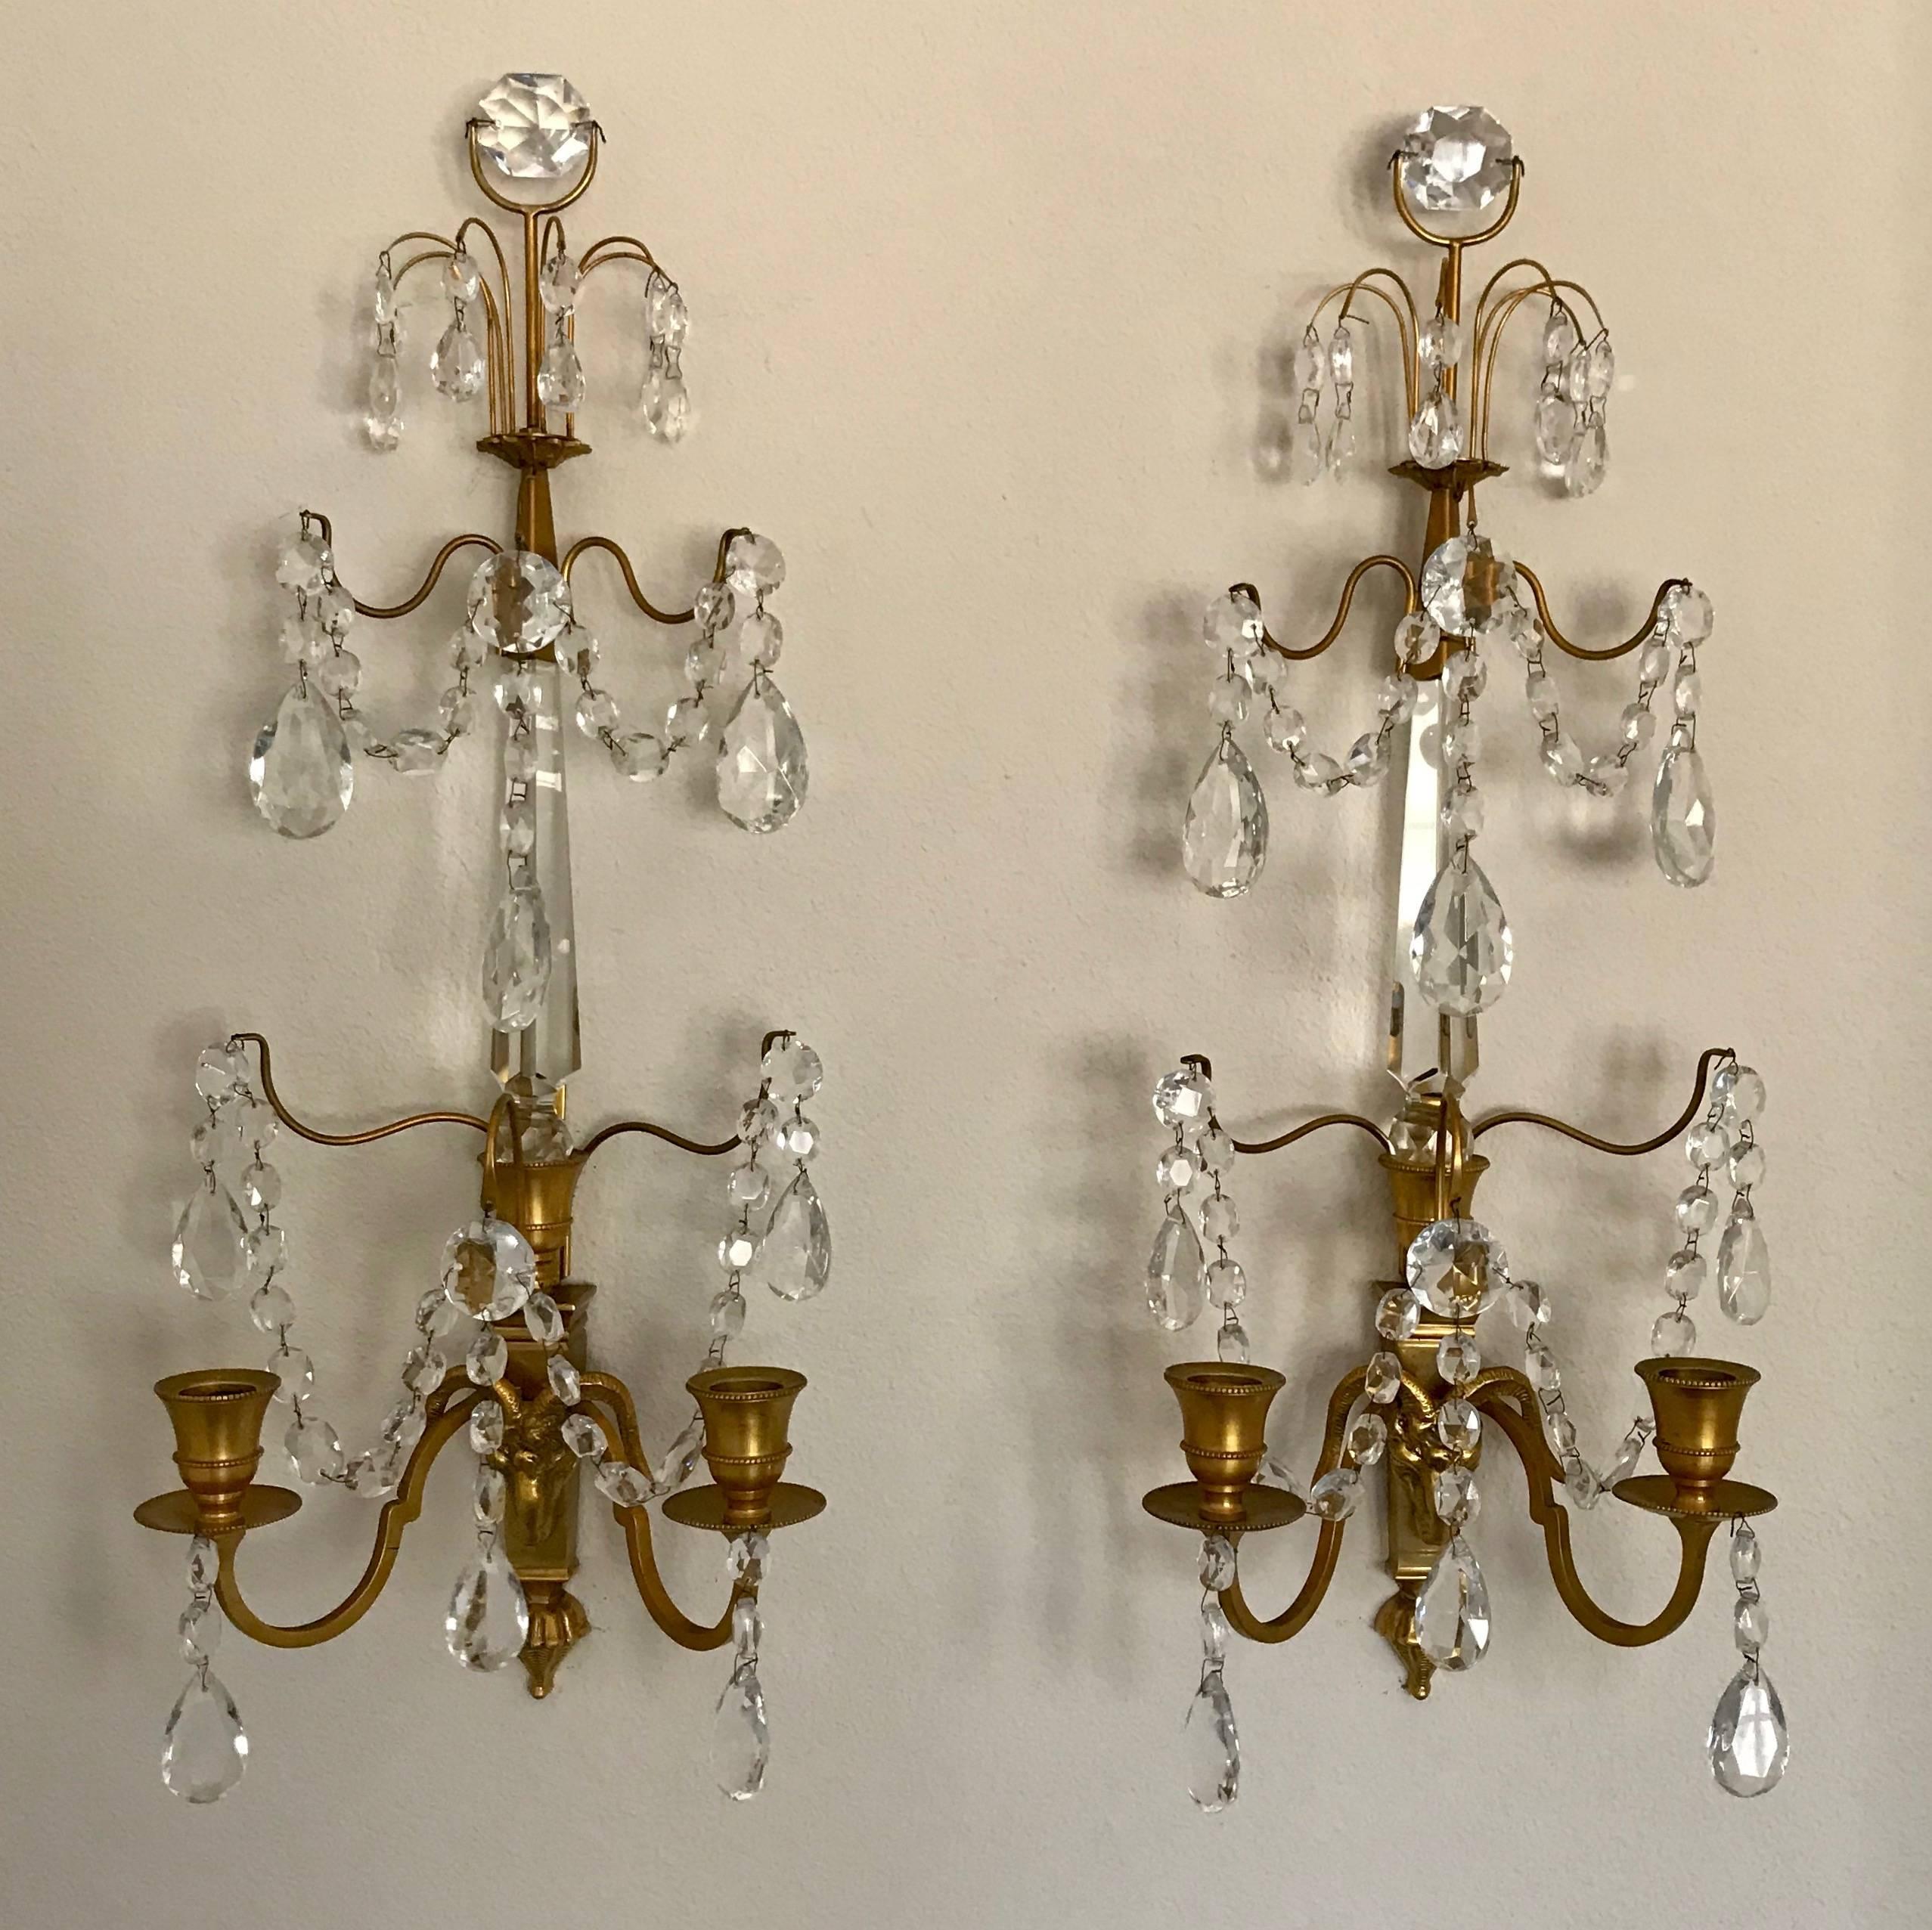 Stunning pair of Swedish or Baltic wall sconces in doré bronze with rams head motif. Two candle arms with central crystal spike and delicately draped festoons of cut crystal drops and swags. Not wired.

Measures: 20-1/2